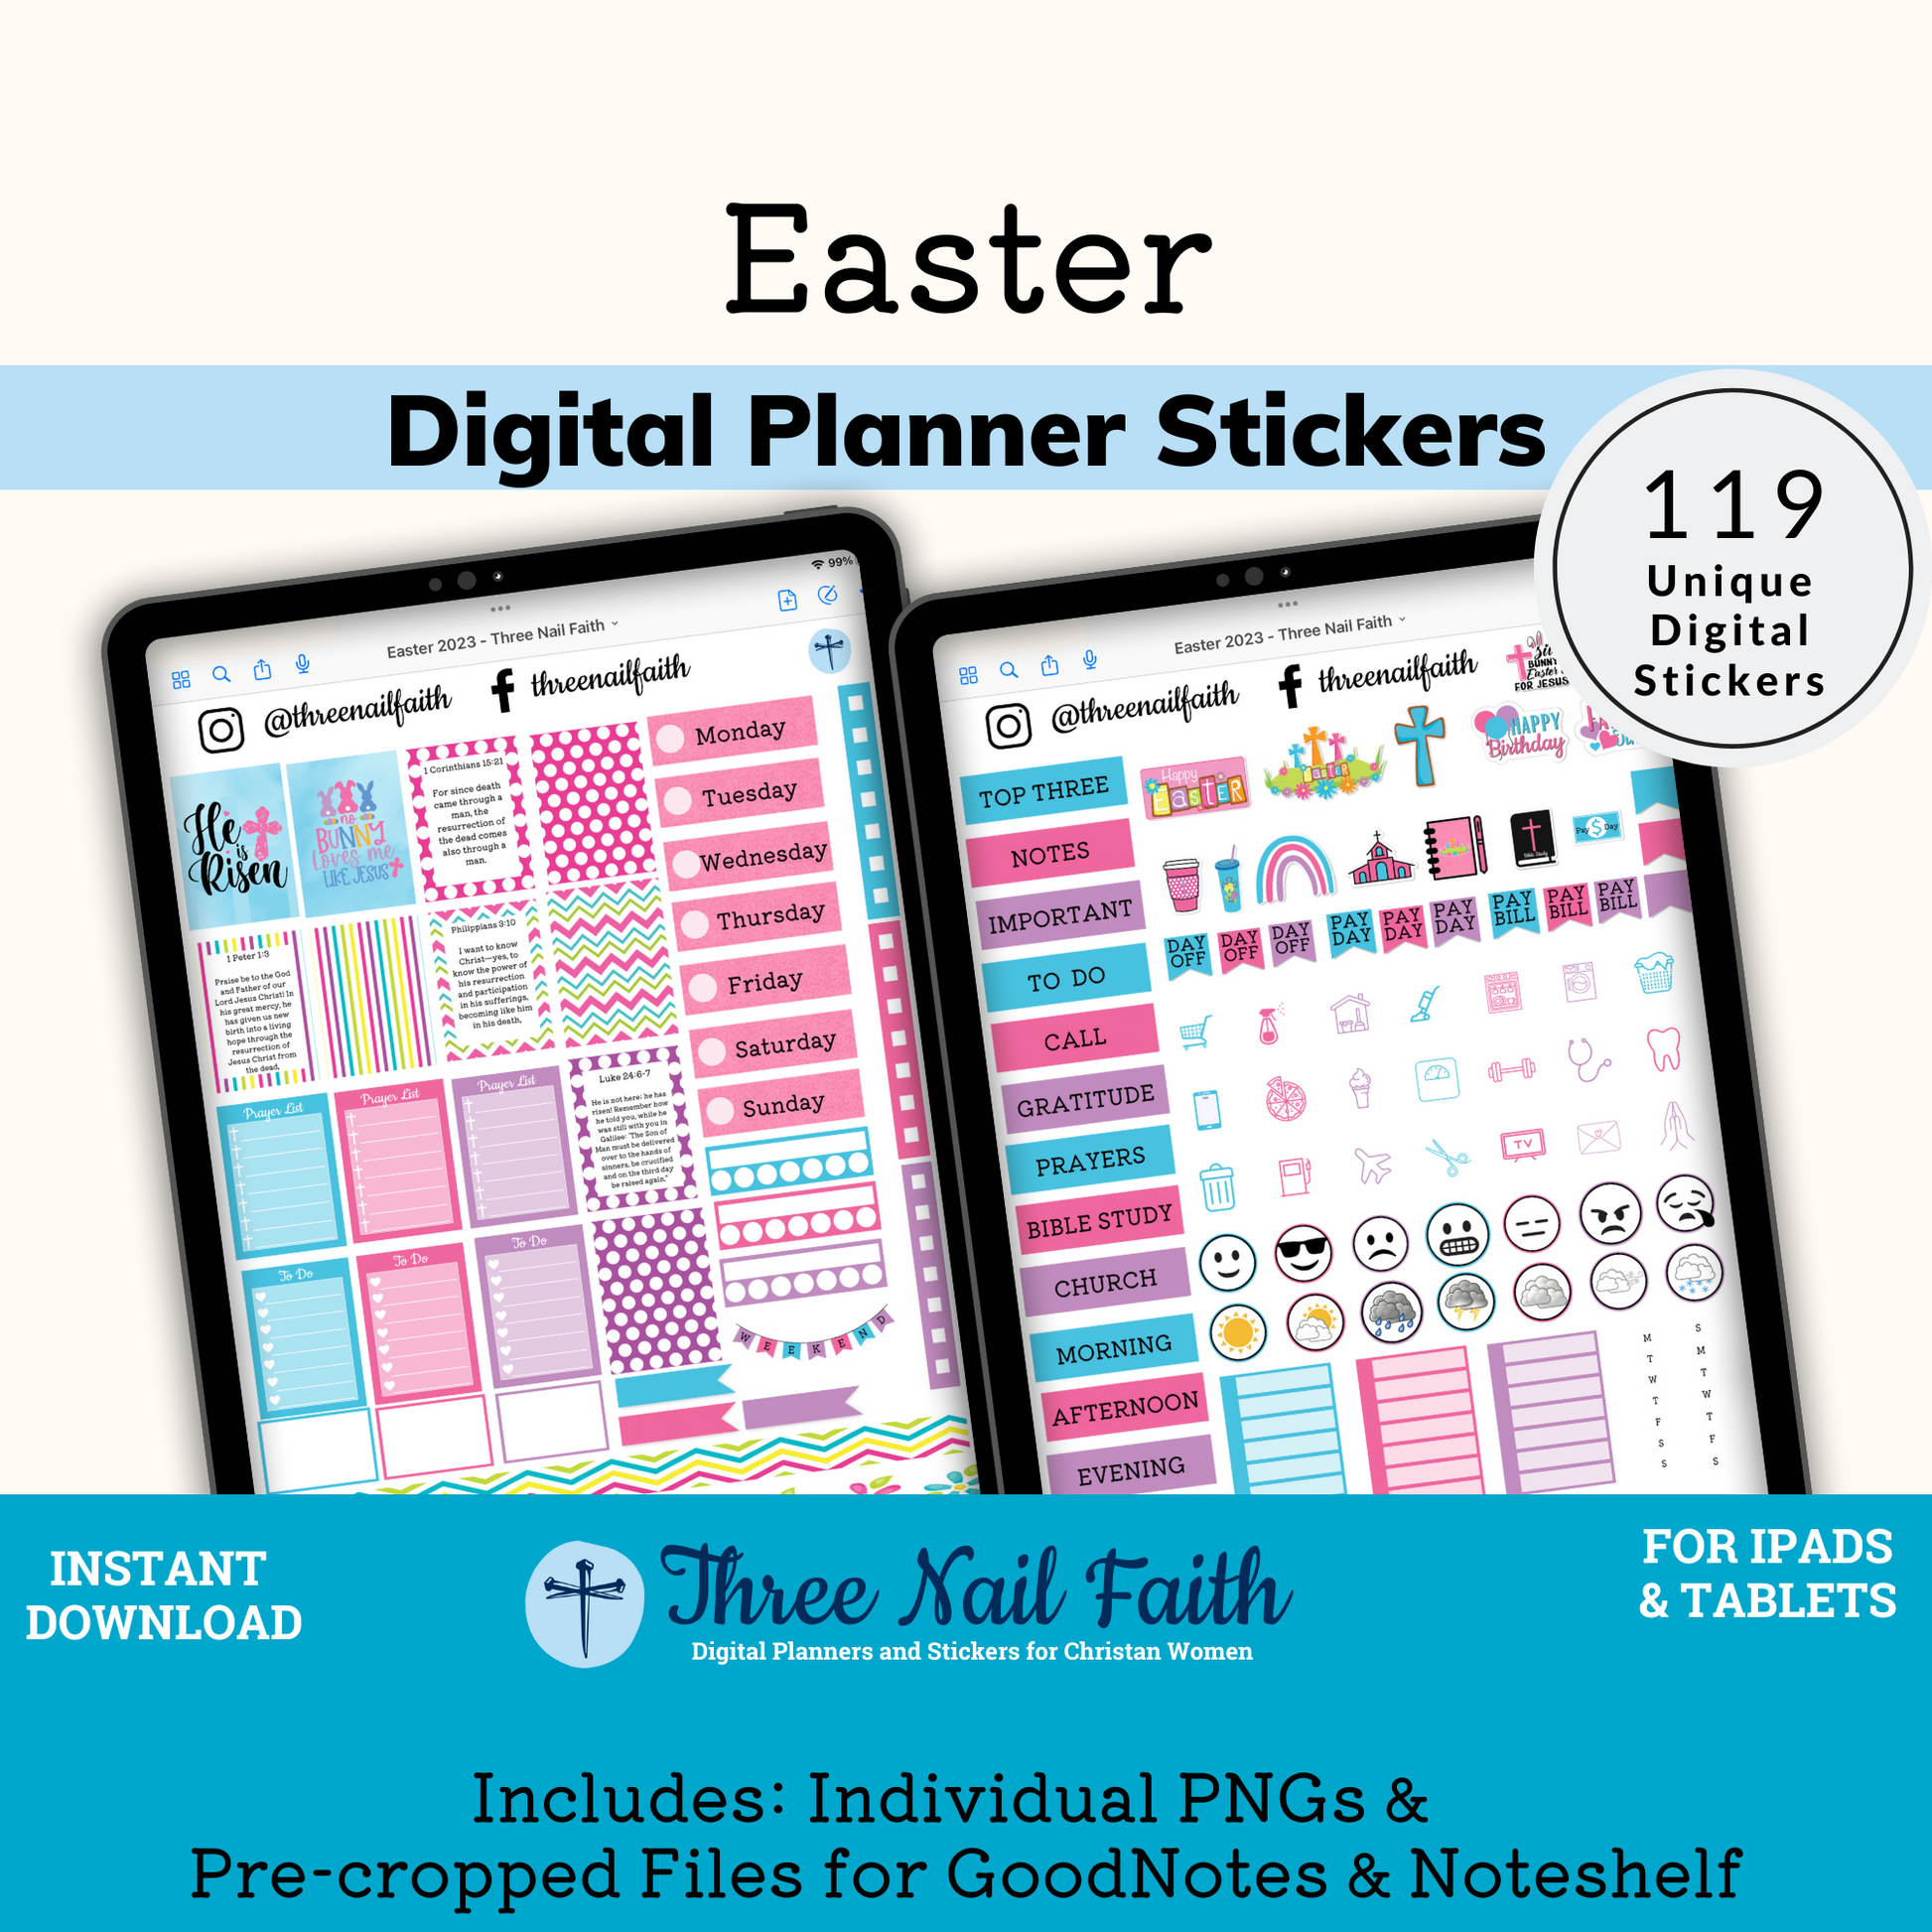 Easter digital sticker kit with 119 Digital stickers